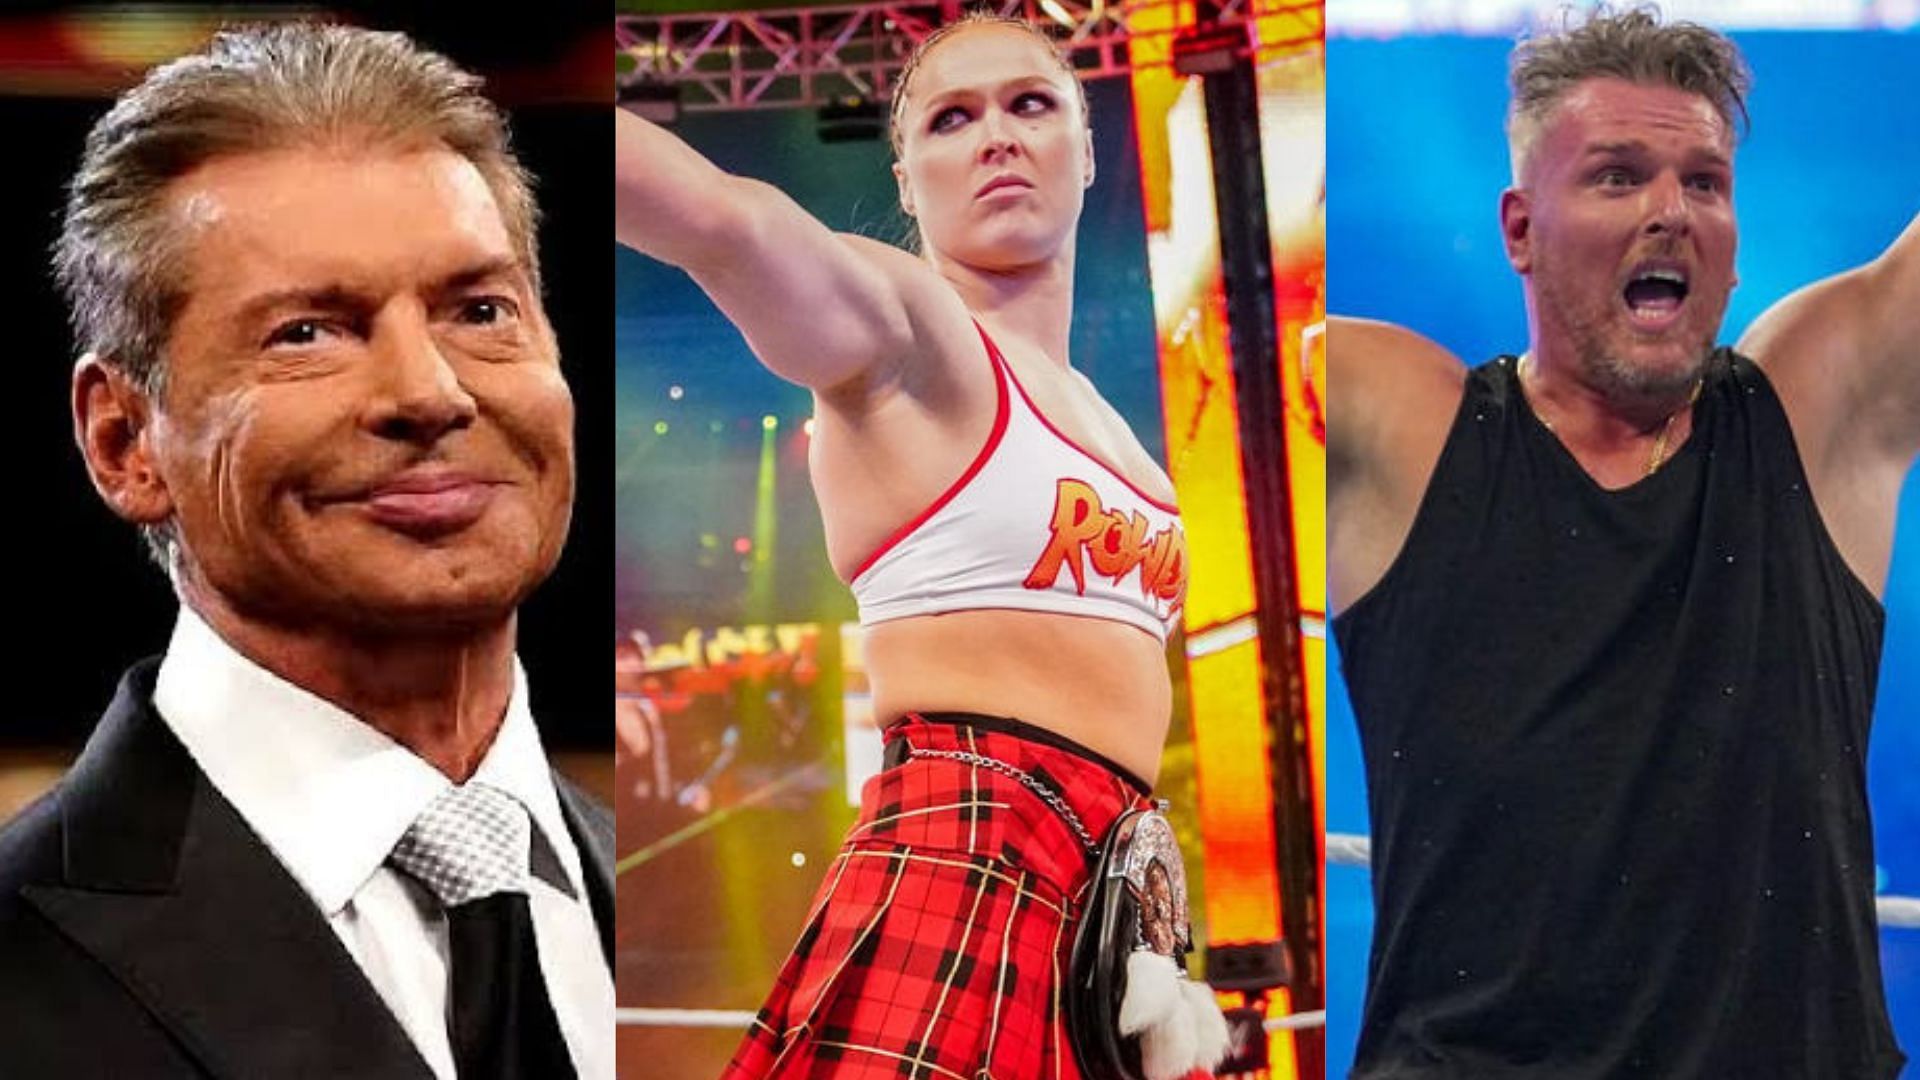 Vince McMahon, Ronda Rousey, and Pat McAfee